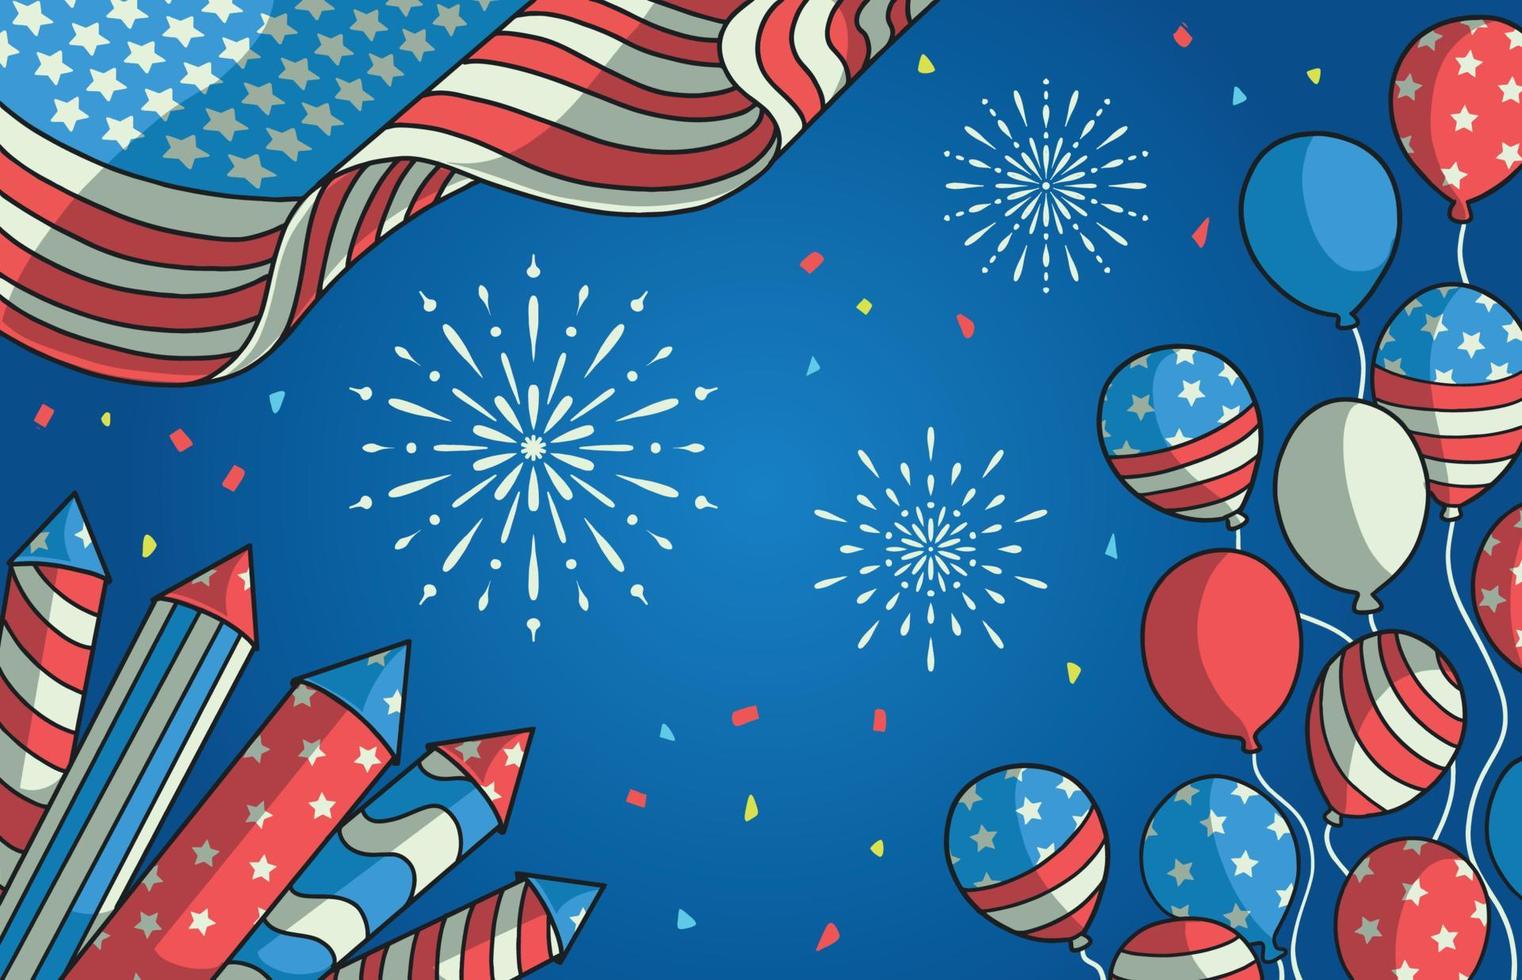 American 4th July Celebration Concept vector